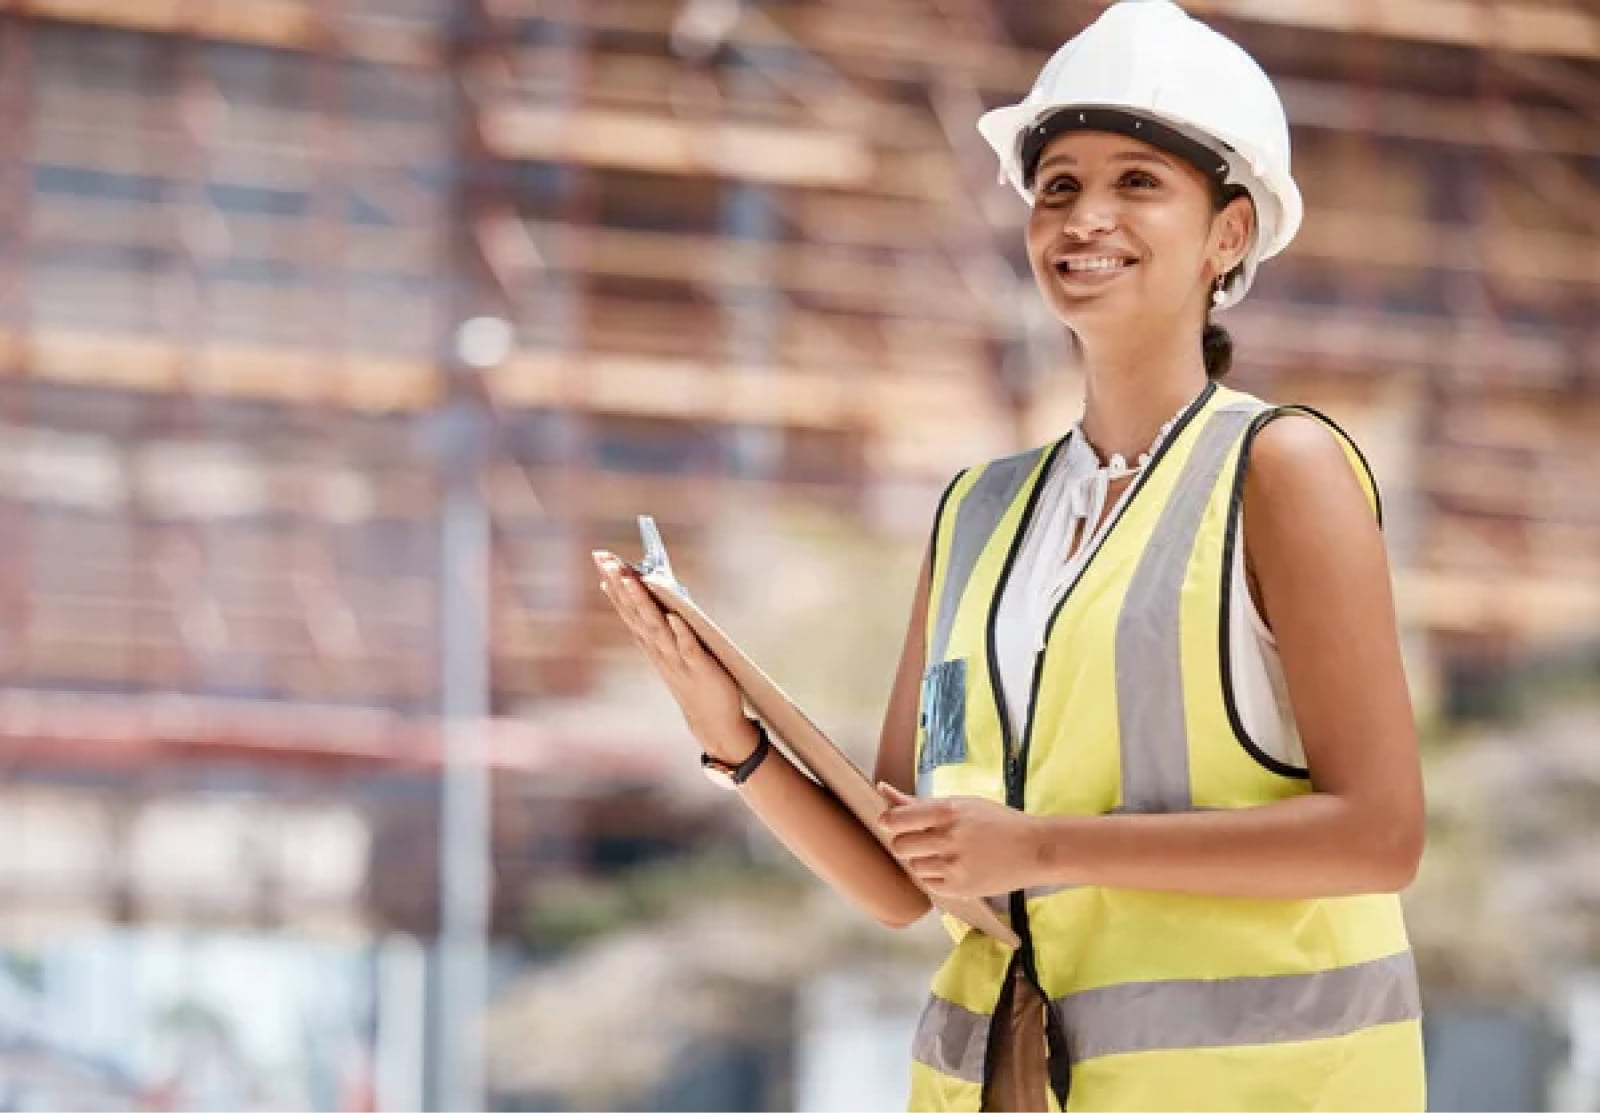 Smiling female construction worker in construction gear on a work site